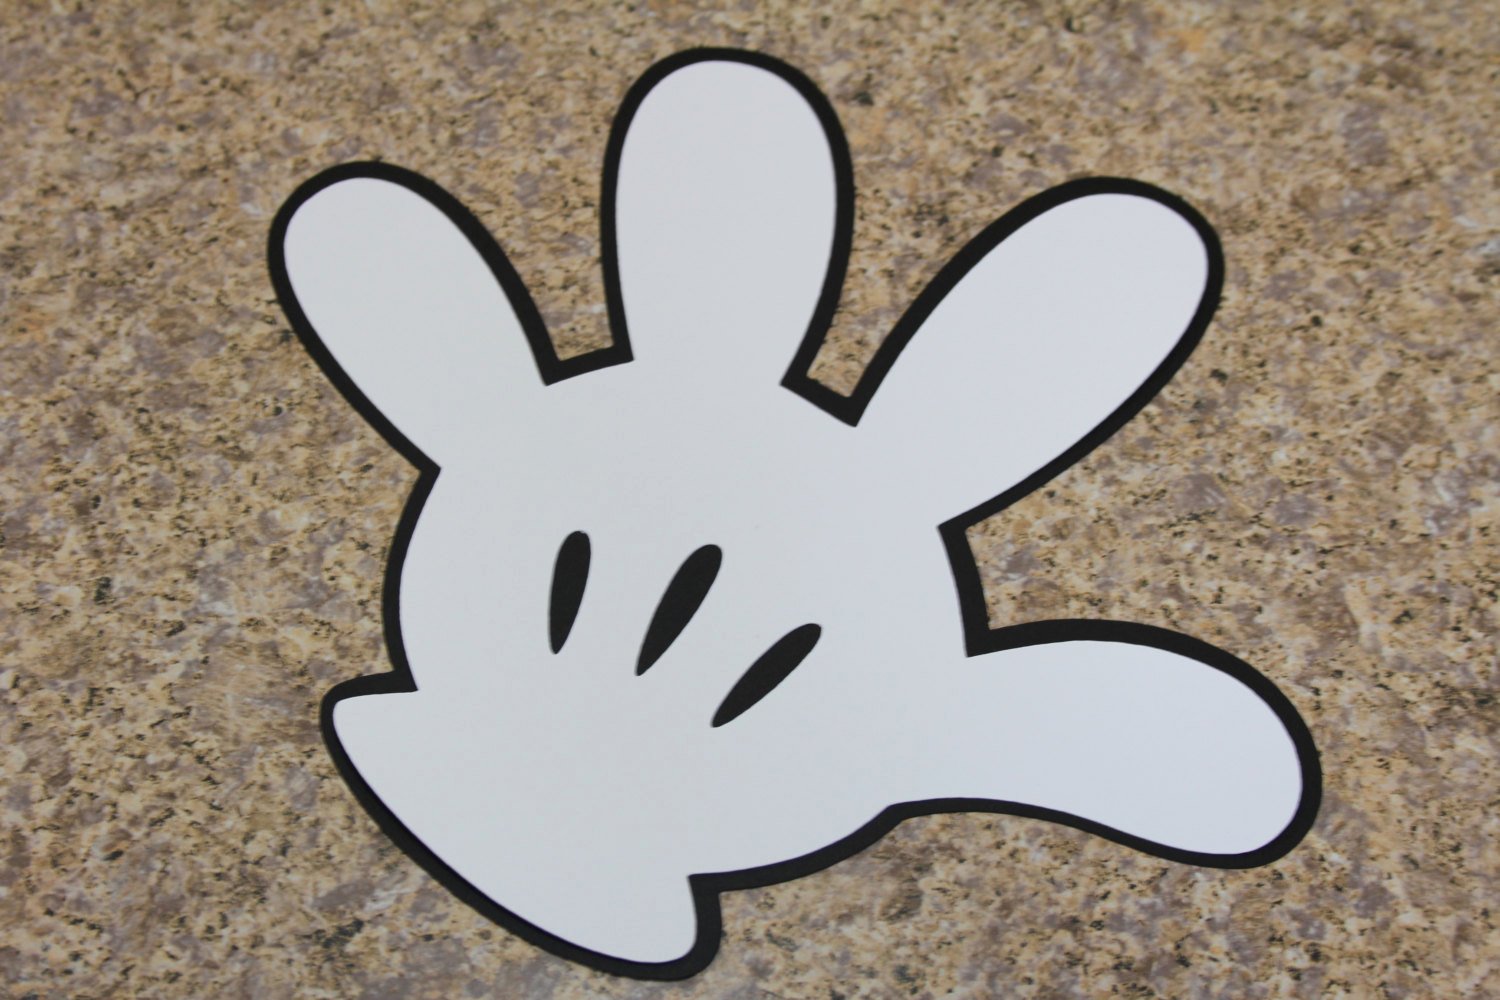 Minnie Mouse Hands Template Unique Free Mickey Mouse Hands Download Free Clip Art Free Clip